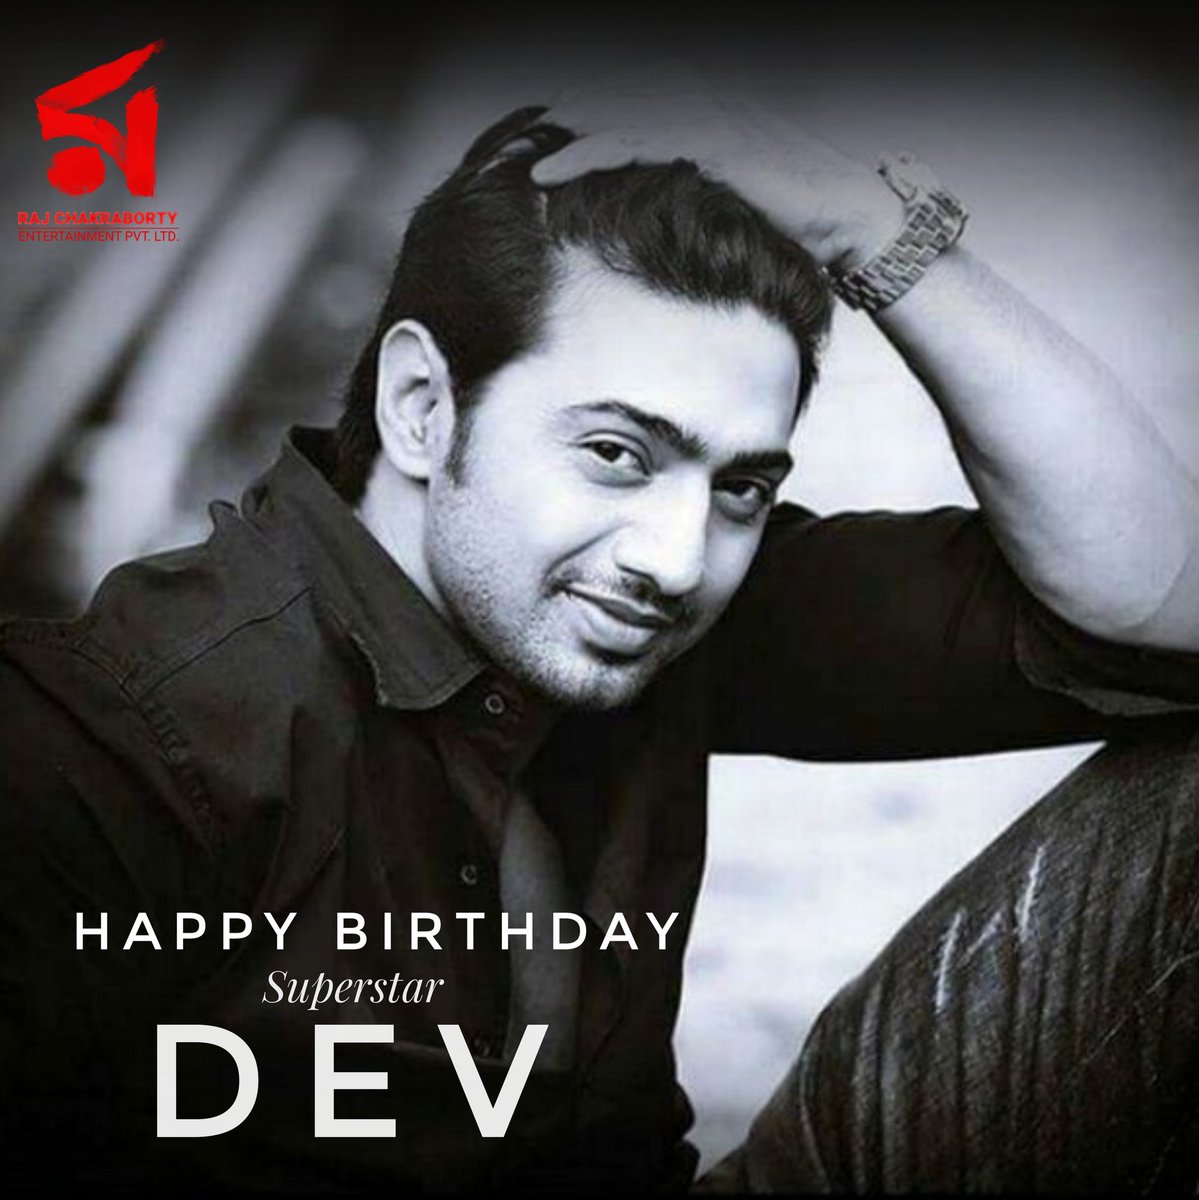 Wishing Superstar @idevadhikari a very warm, loving and happy Birthday from all of us at #TeamRCE